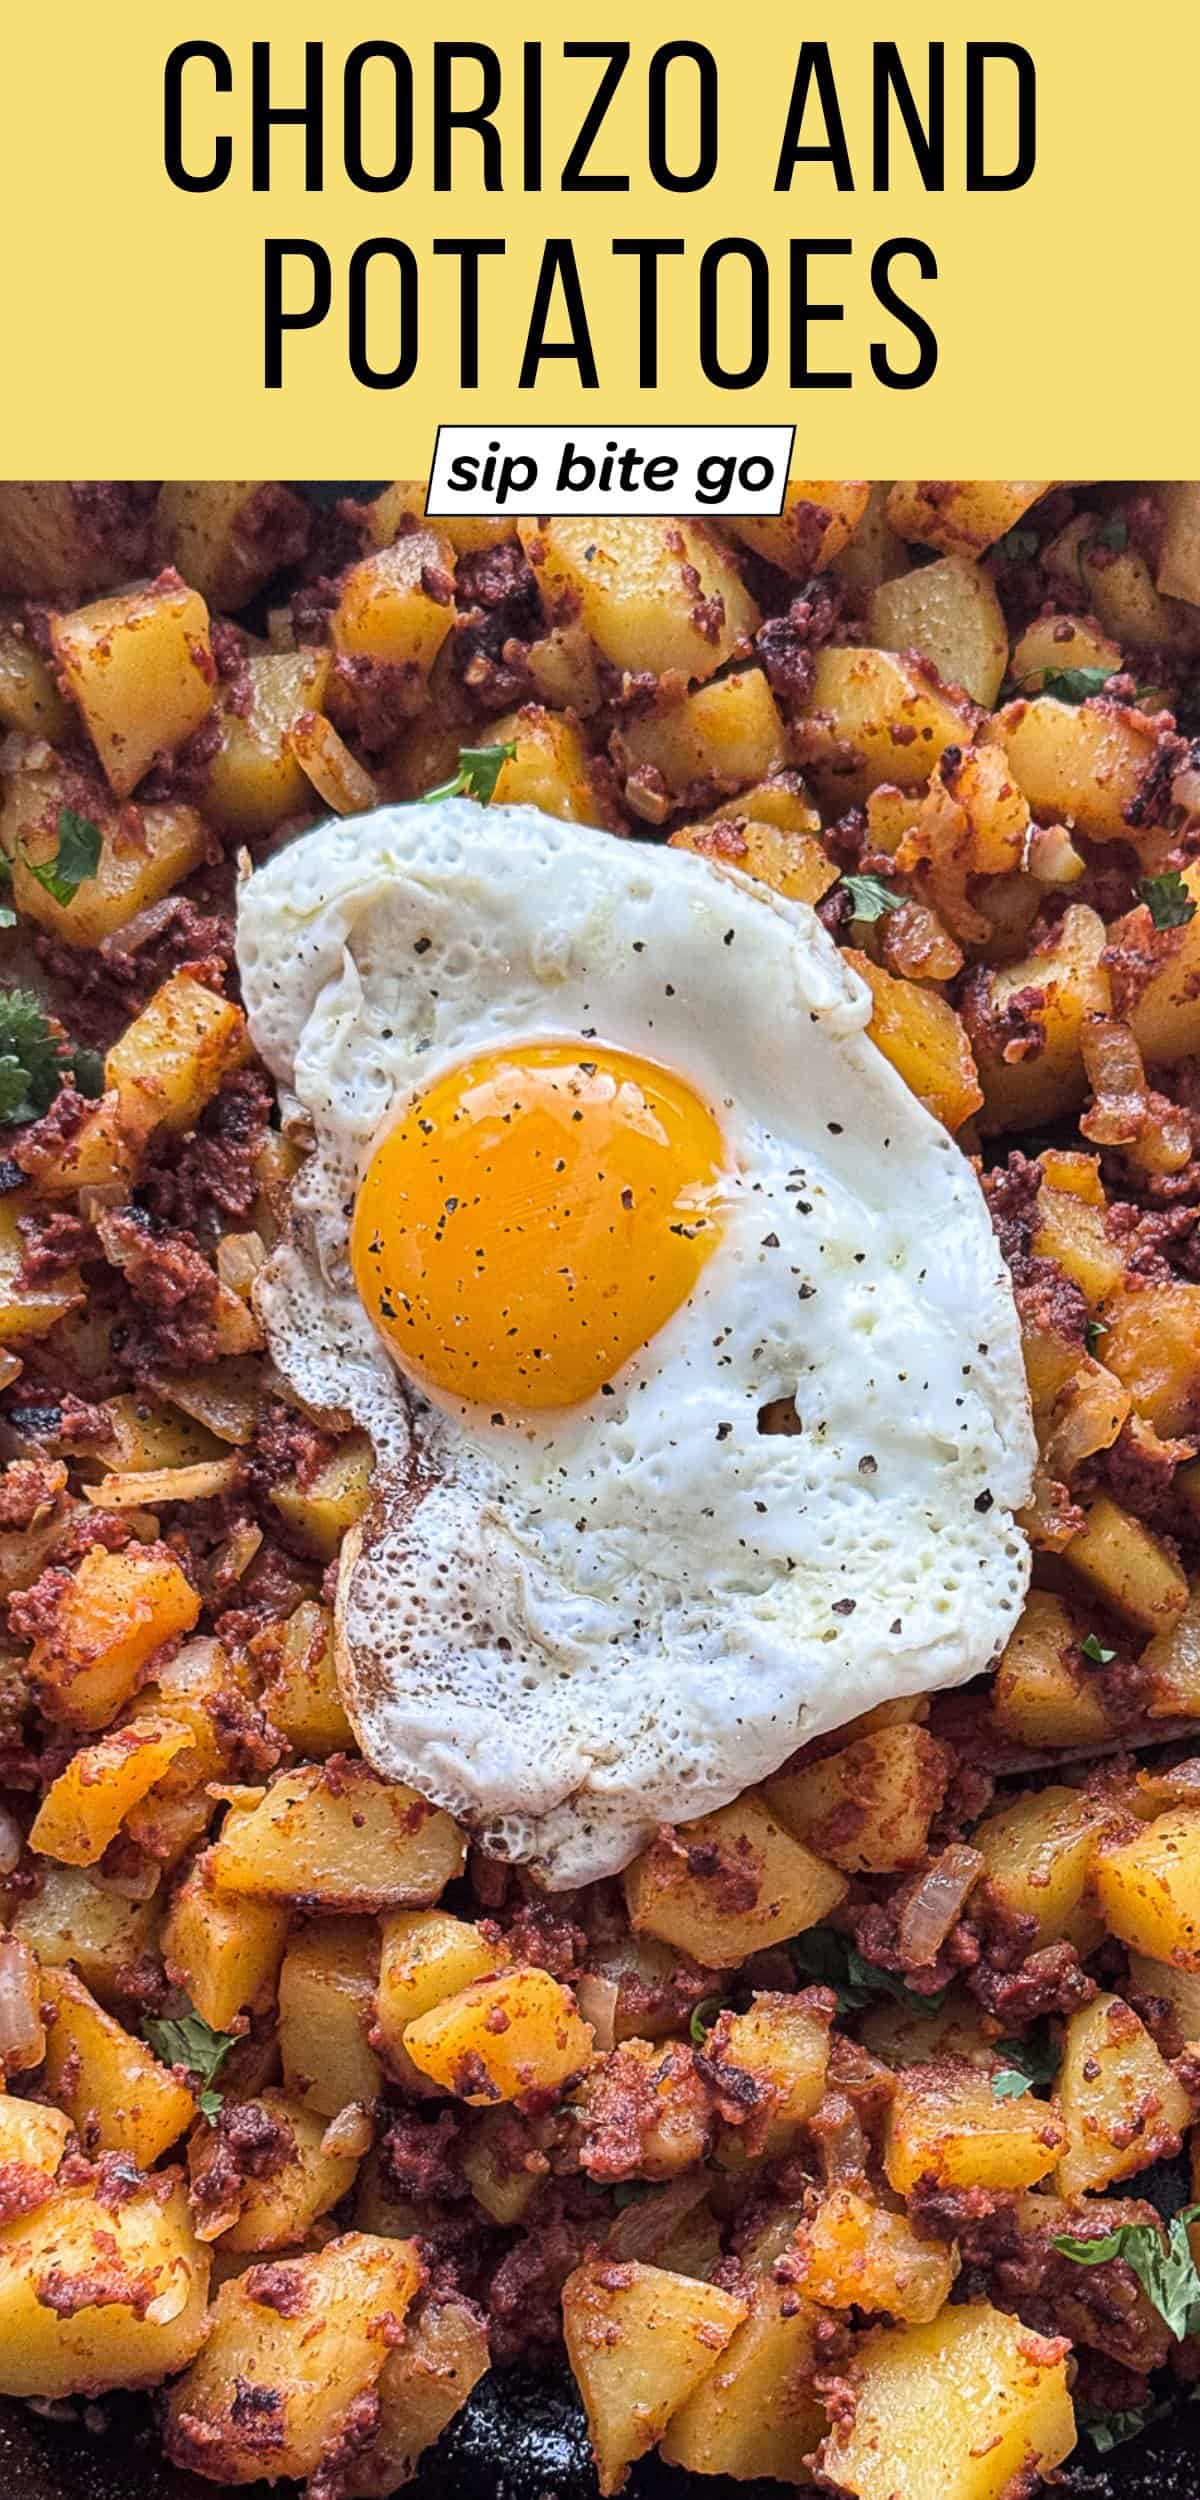 Chorizo and Potatoes with Eggs Recipe for Mexican Papas Con Chorizo with text overlay